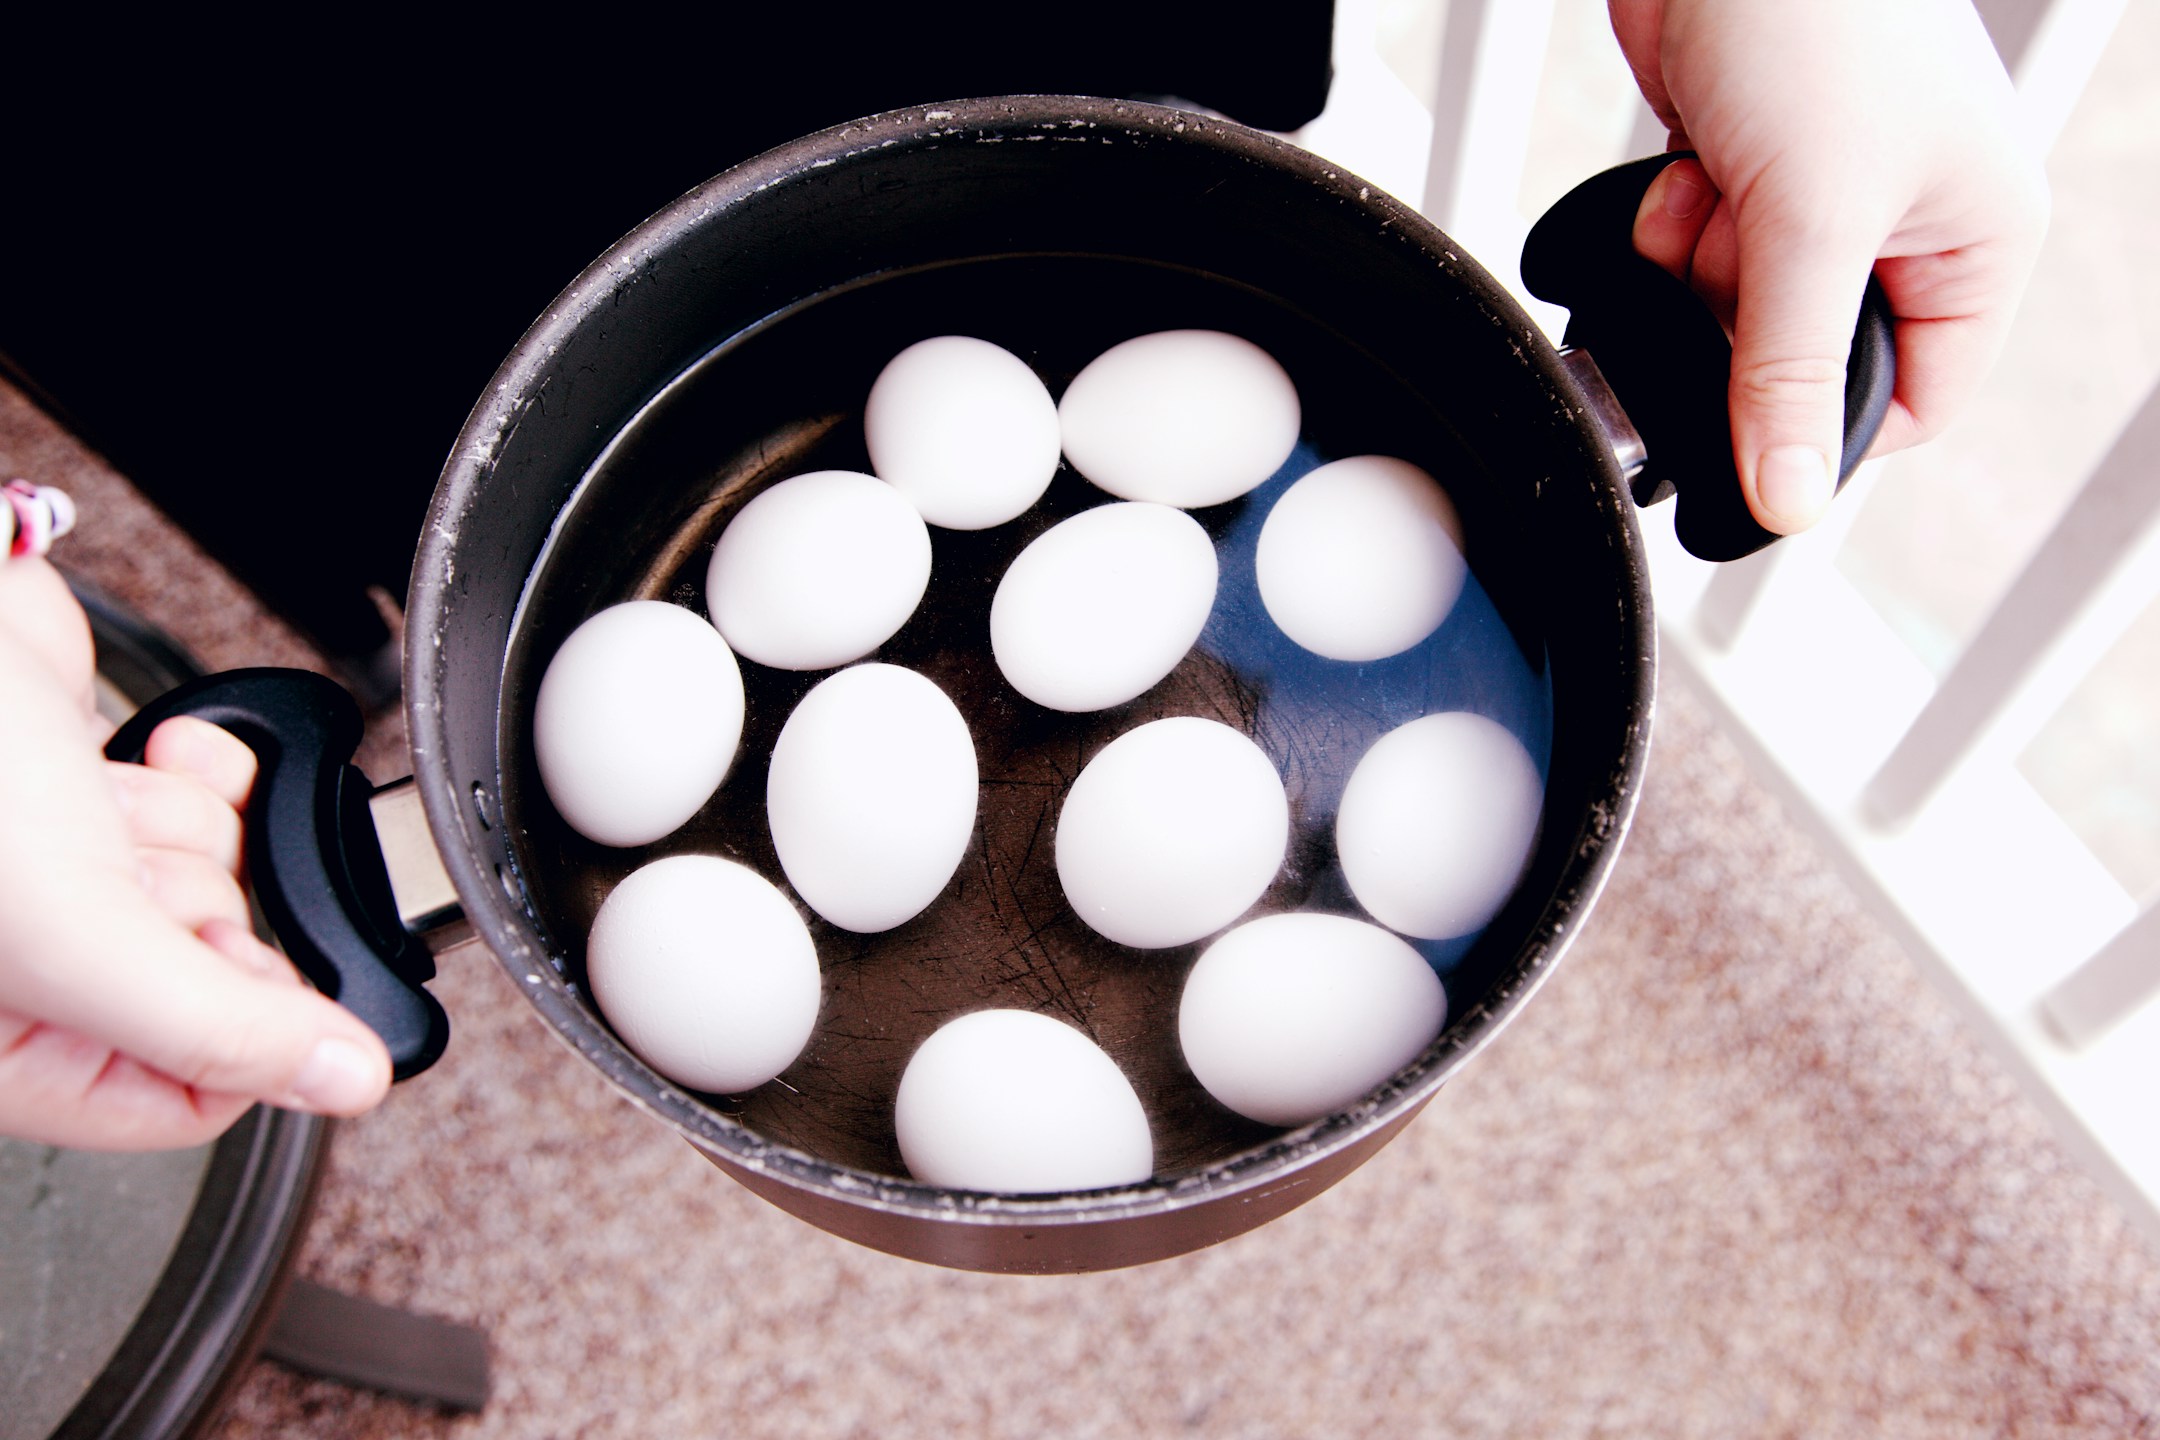 https://hindi.krishijagran.com/ampstories/do-not-waste-water-after-boiling-egg-it-can-be-use-as-fertilizer-for-plants.html